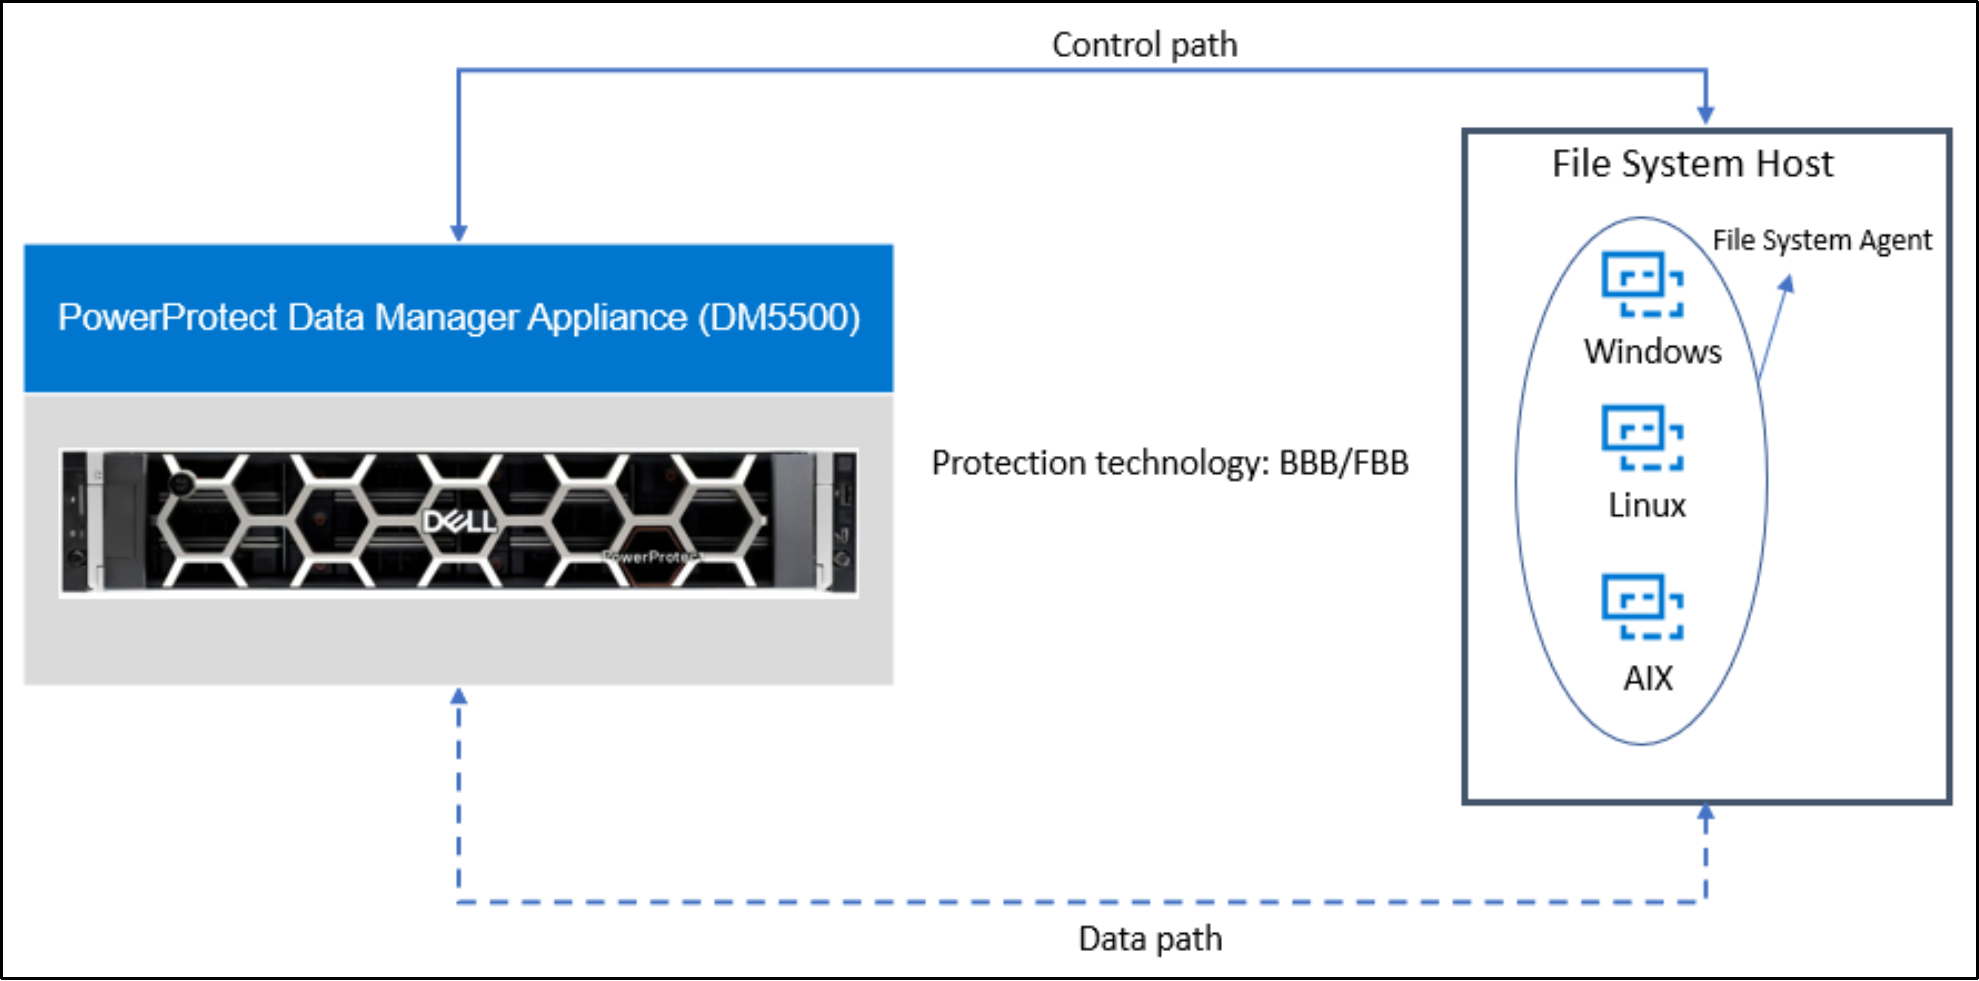 The image shows the File system protection with the Data Manager Appliance